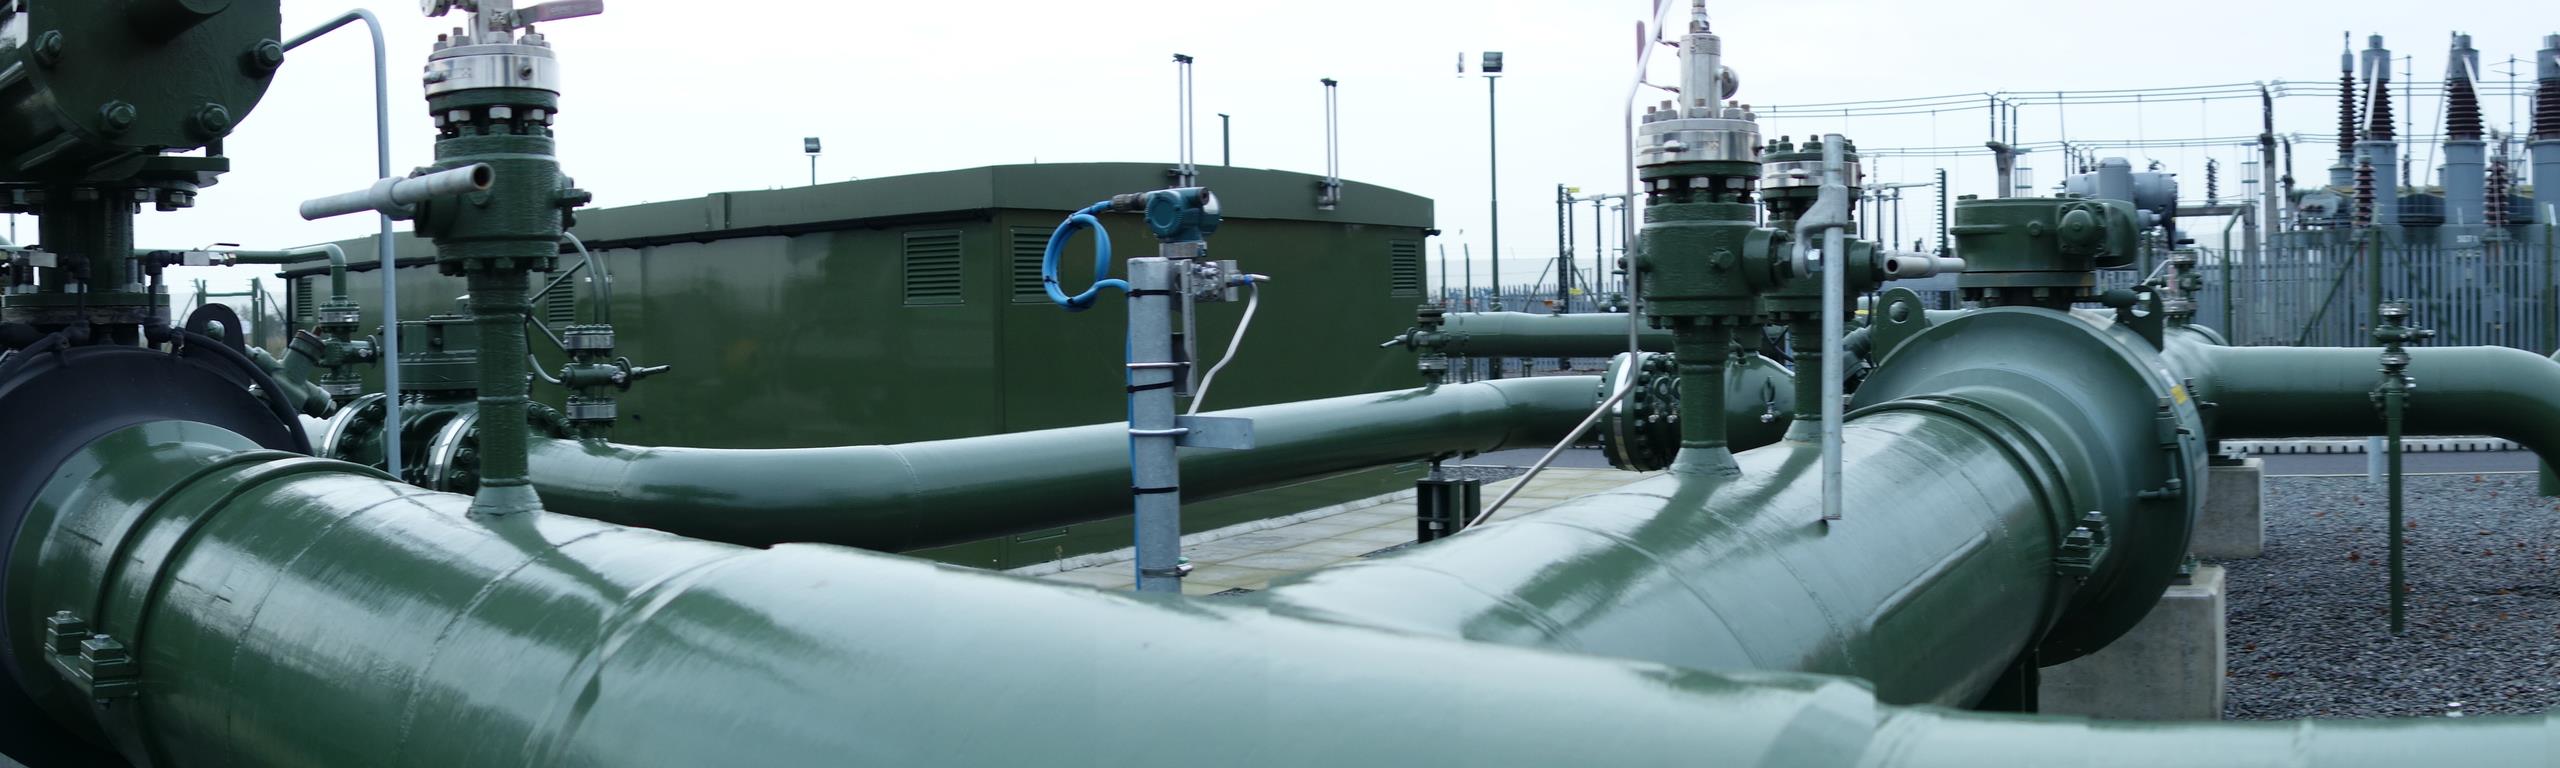 Pipelines at a UK oil and gas transmission and distribution facility